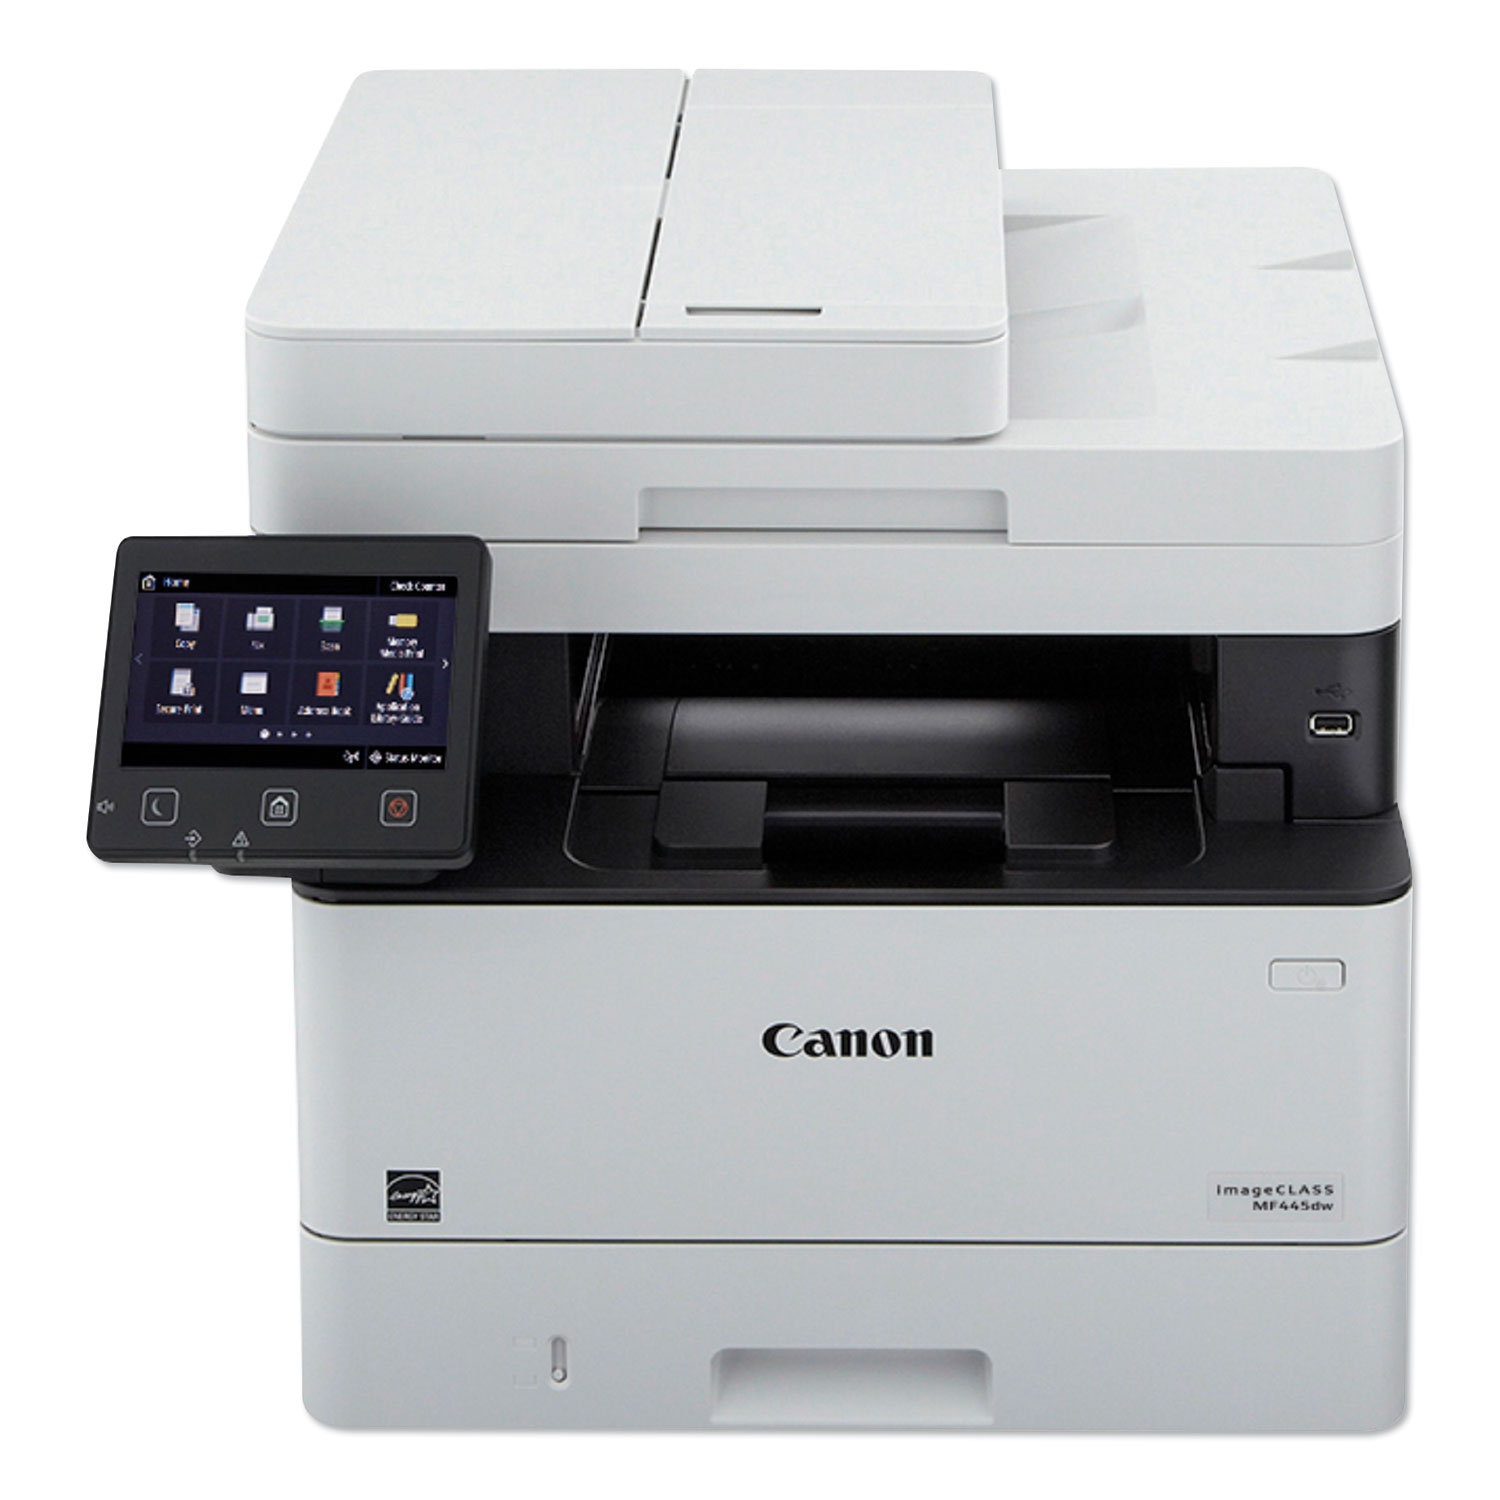  Canon 3514C004 imageCLASS MF445dw Black and White Compact Multifunction Printer, Copy/Fax/Print/Scan (CNM3514C004) 